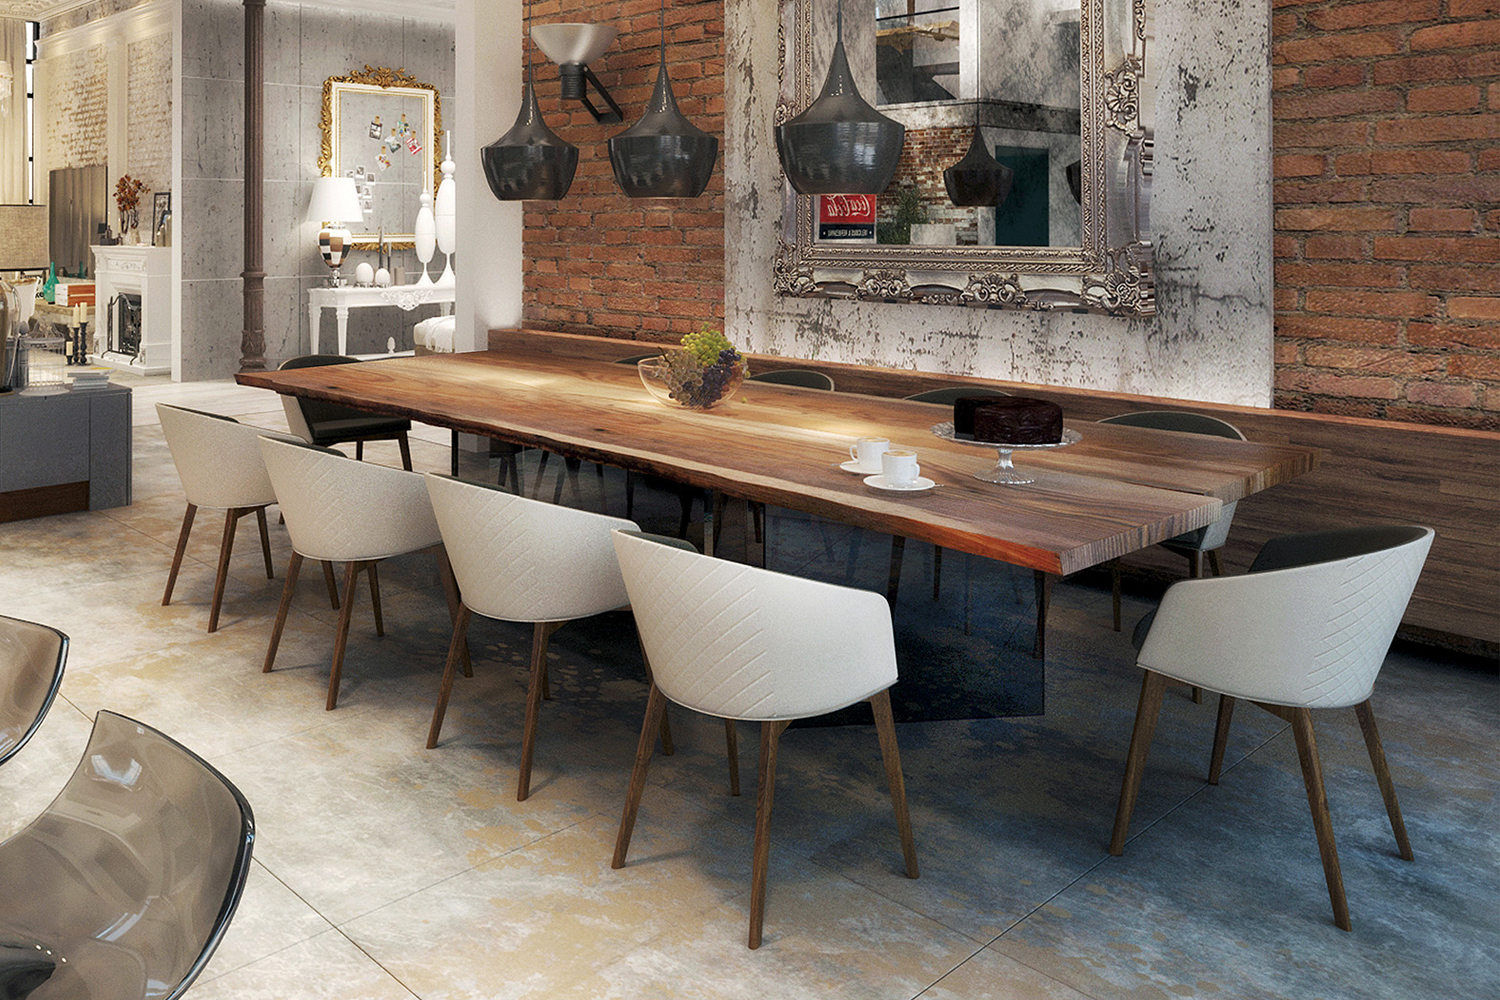 Luxury Dining Room Sets, Modern Dining Room Table And Chairs Uk